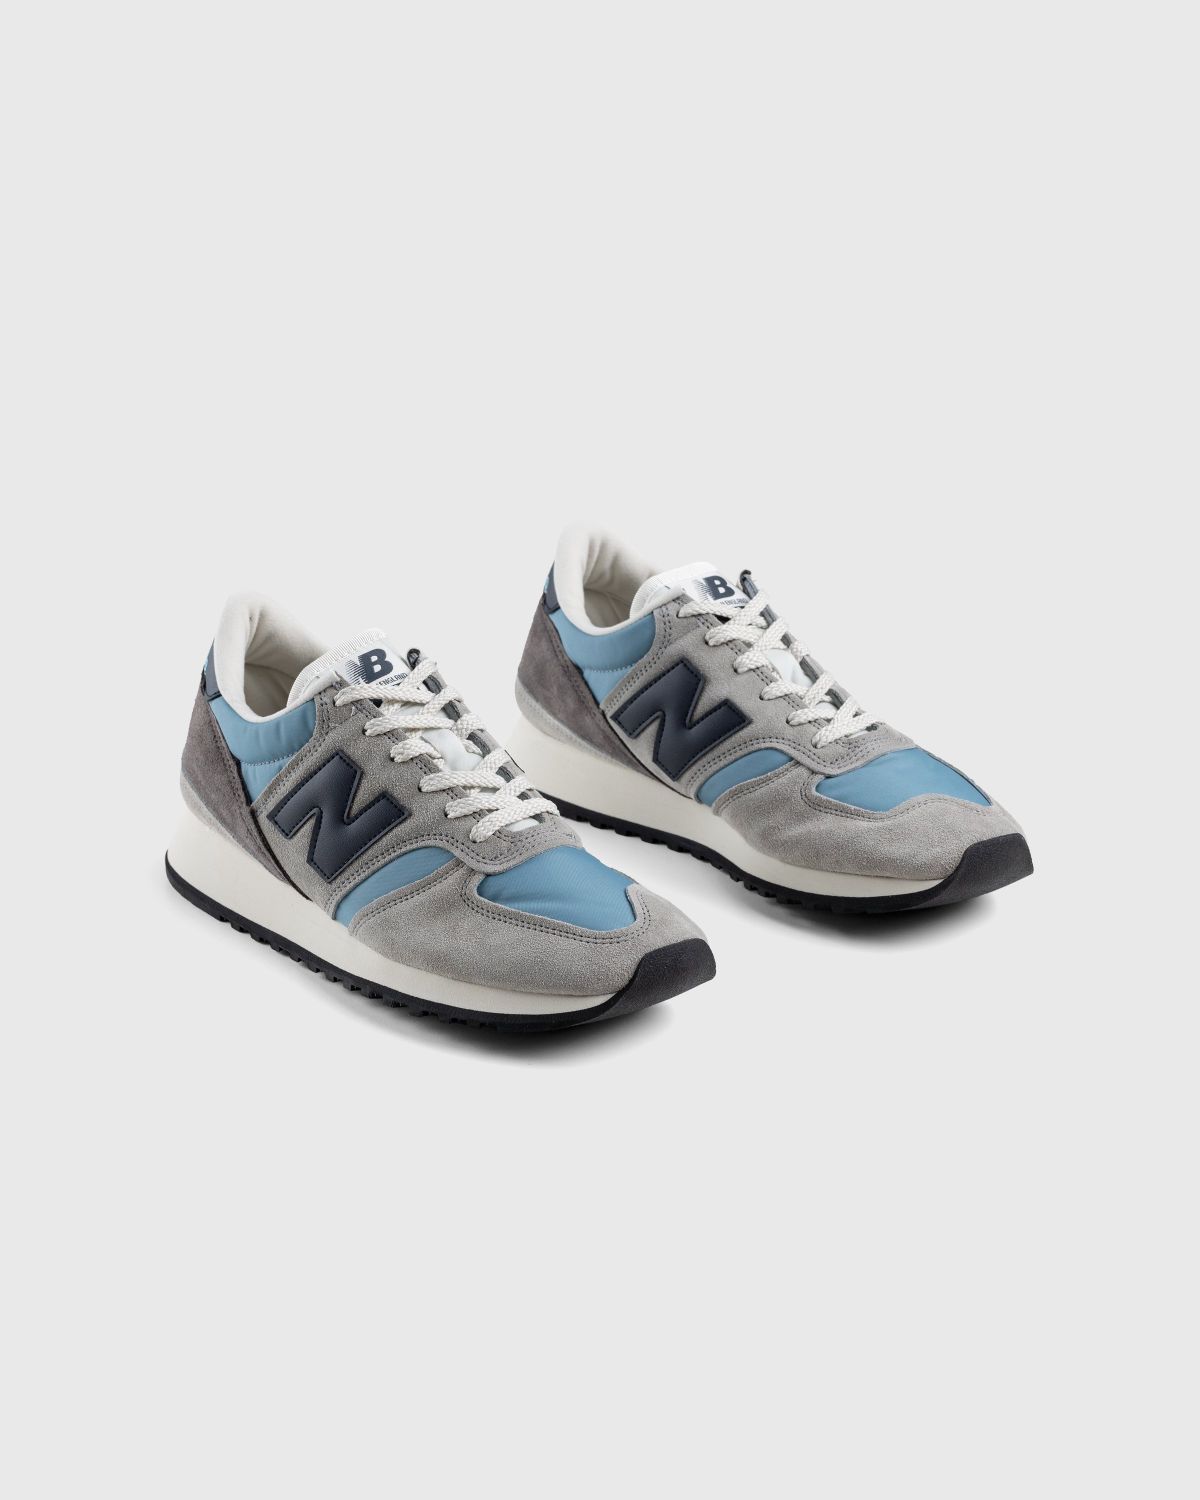 New Balance – M730GBN Grey/Blue - Sneakers - Grey - Image 3